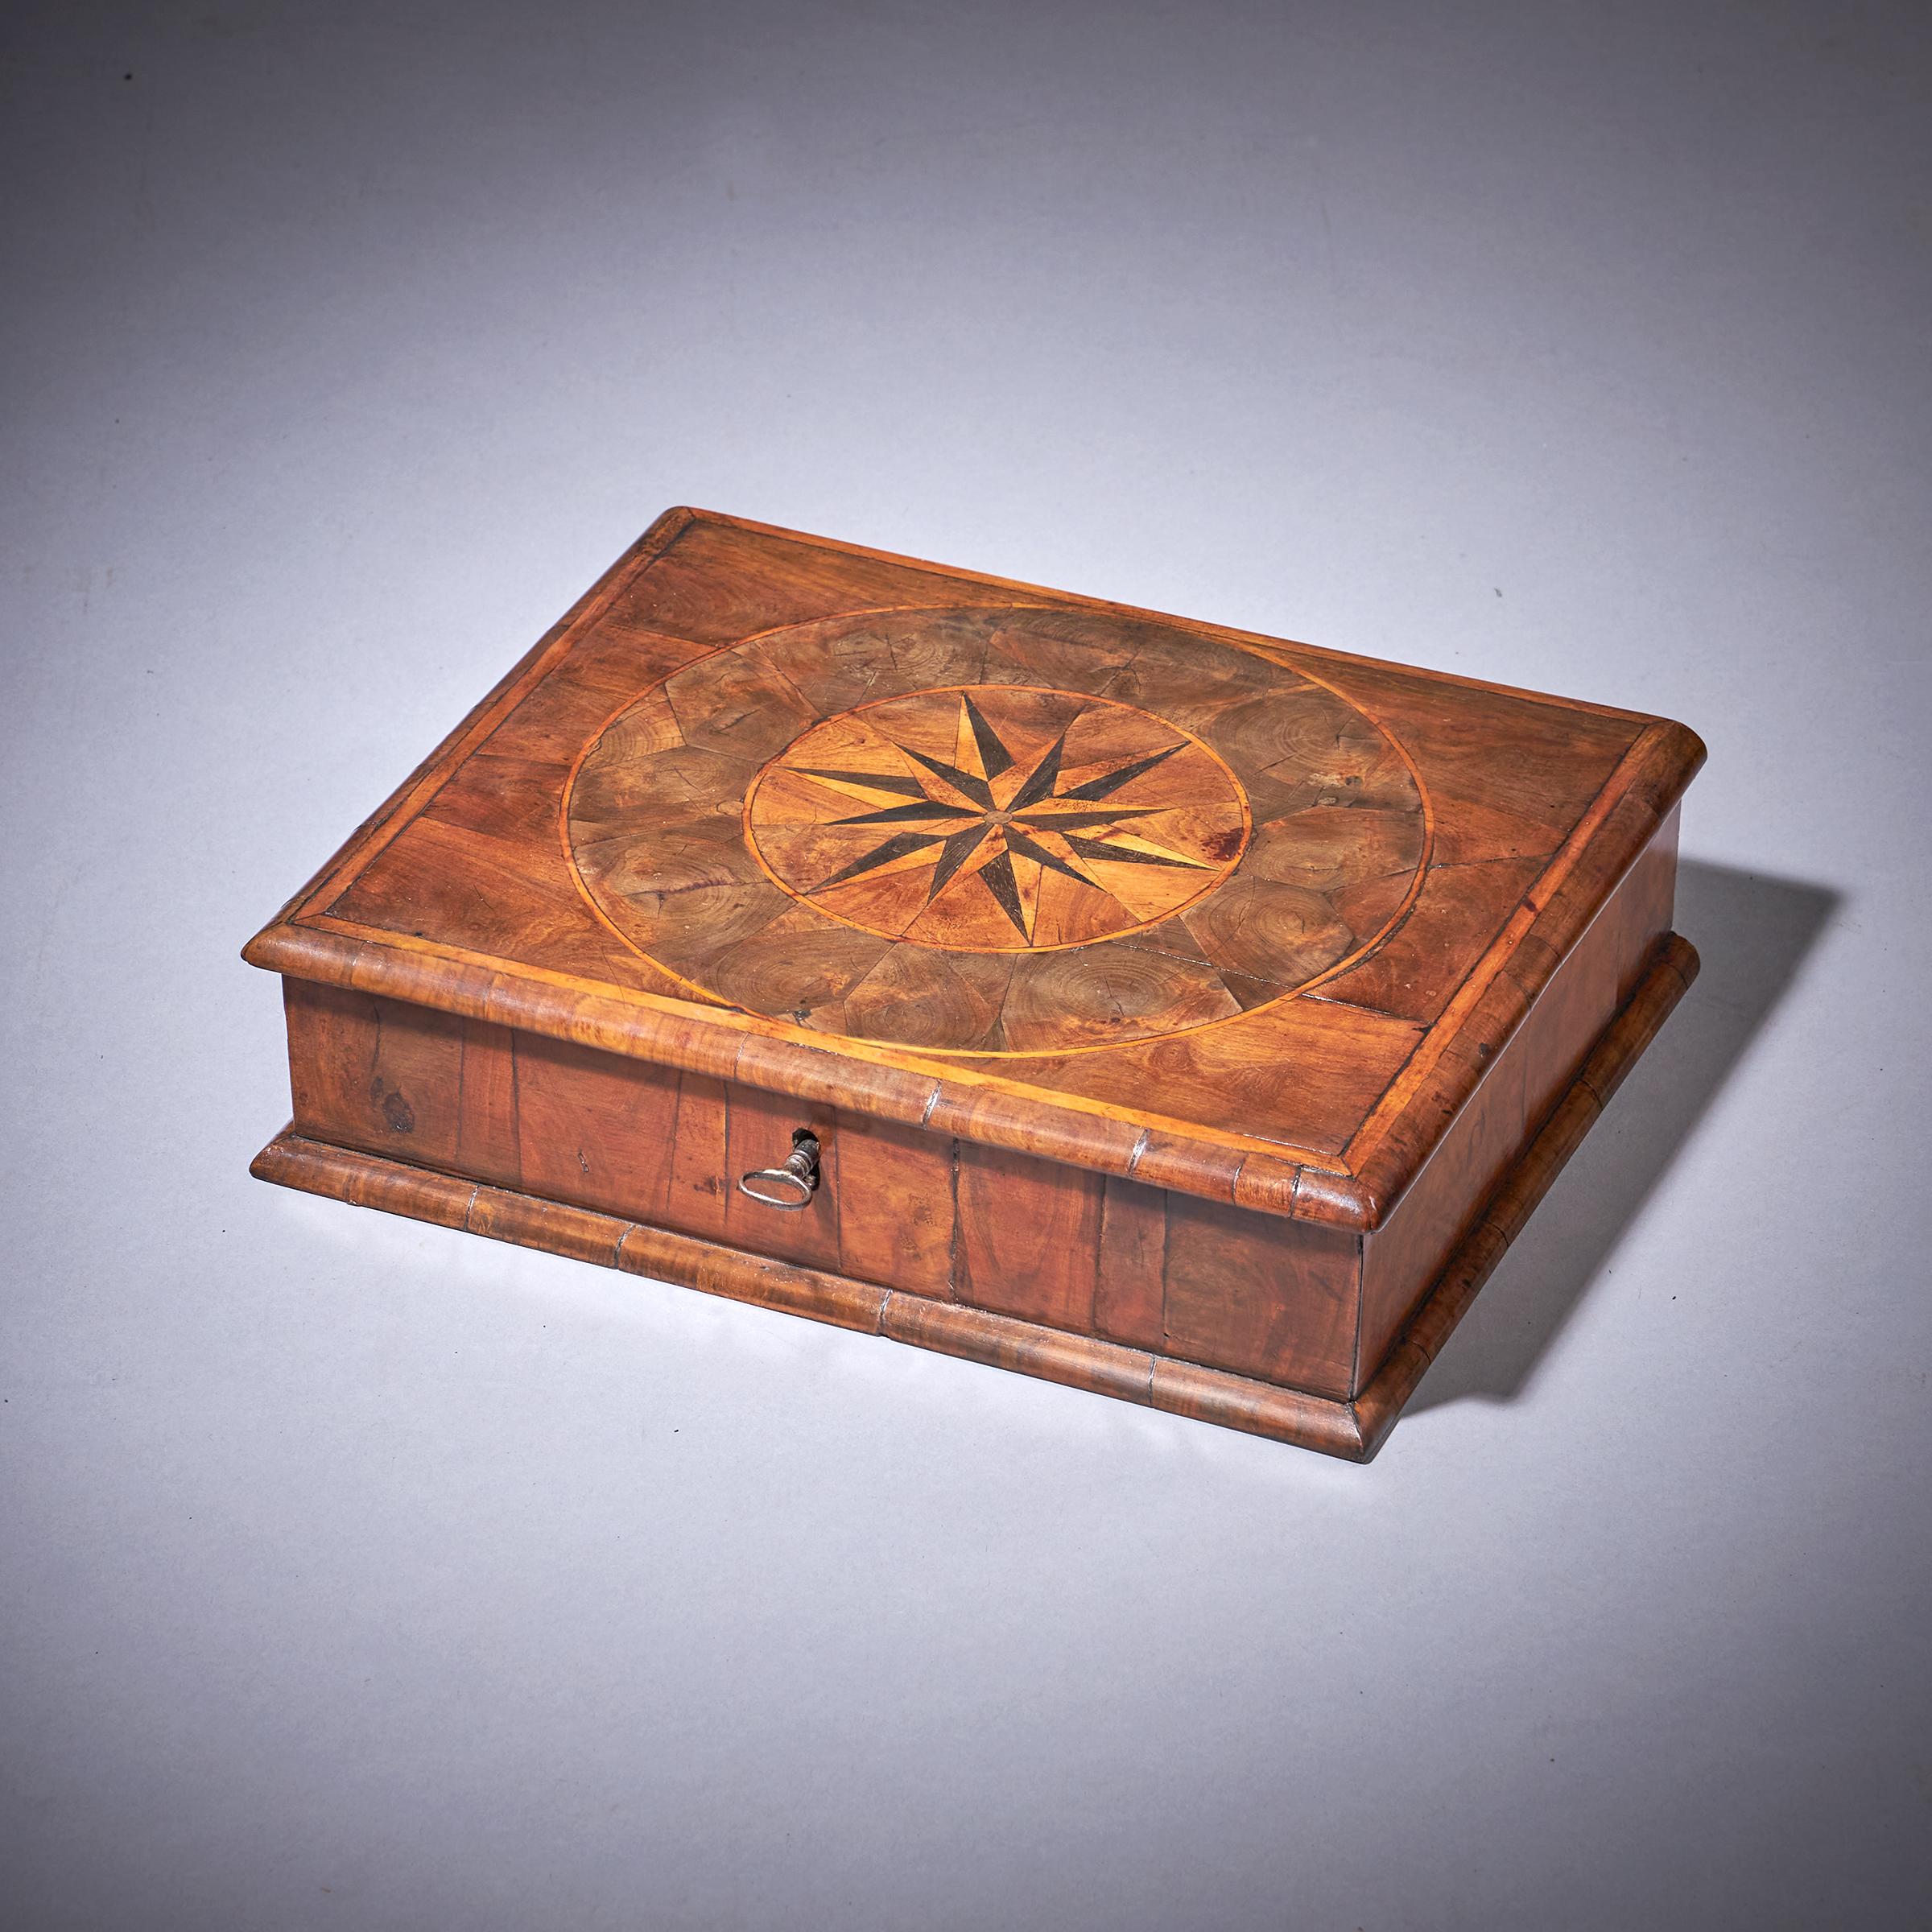 A fine and rare Charles II / William and Mary 17th-century olive oyster lace box of small proportions with parquetry star inlay. C.1670-1700. England

The cross-grain moulded and holly banded top is finely veneered in hand-cut pieces of olive cut